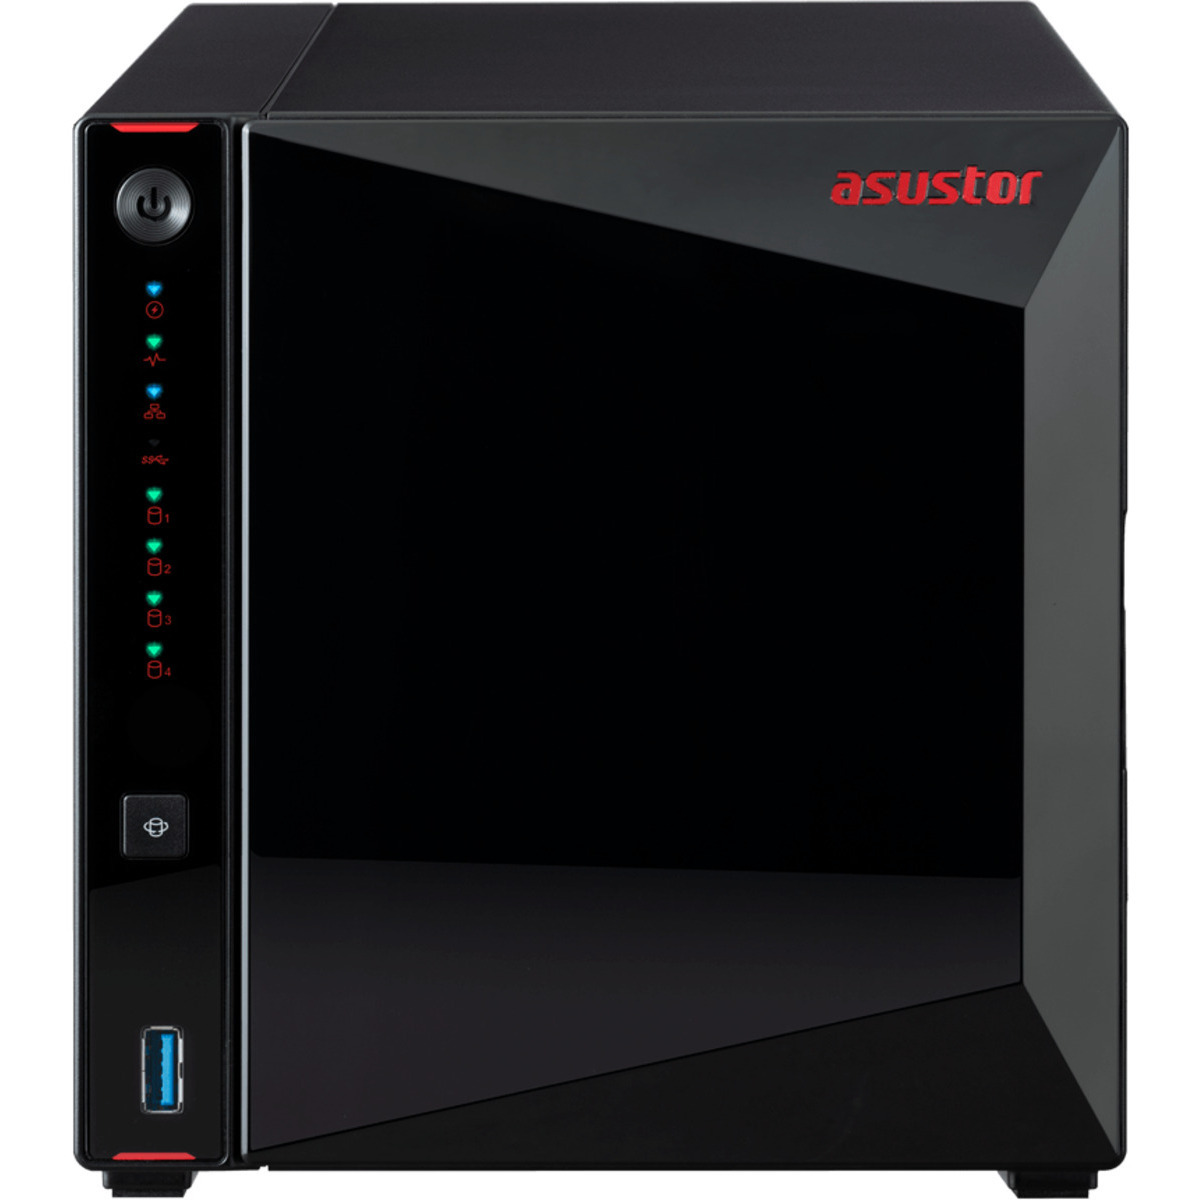 ASUSTOR AS5304T Nimbustor 48tb 4-Bay Desktop Multimedia / Power User / Business NAS - Network Attached Storage Device 3x16tb Seagate IronWolf Pro ST16000NT001 3.5 7200rpm SATA 6Gb/s HDD NAS Class Drives Installed - Burn-In Tested - ON SALE - FREE RAM UPGRADE AS5304T Nimbustor